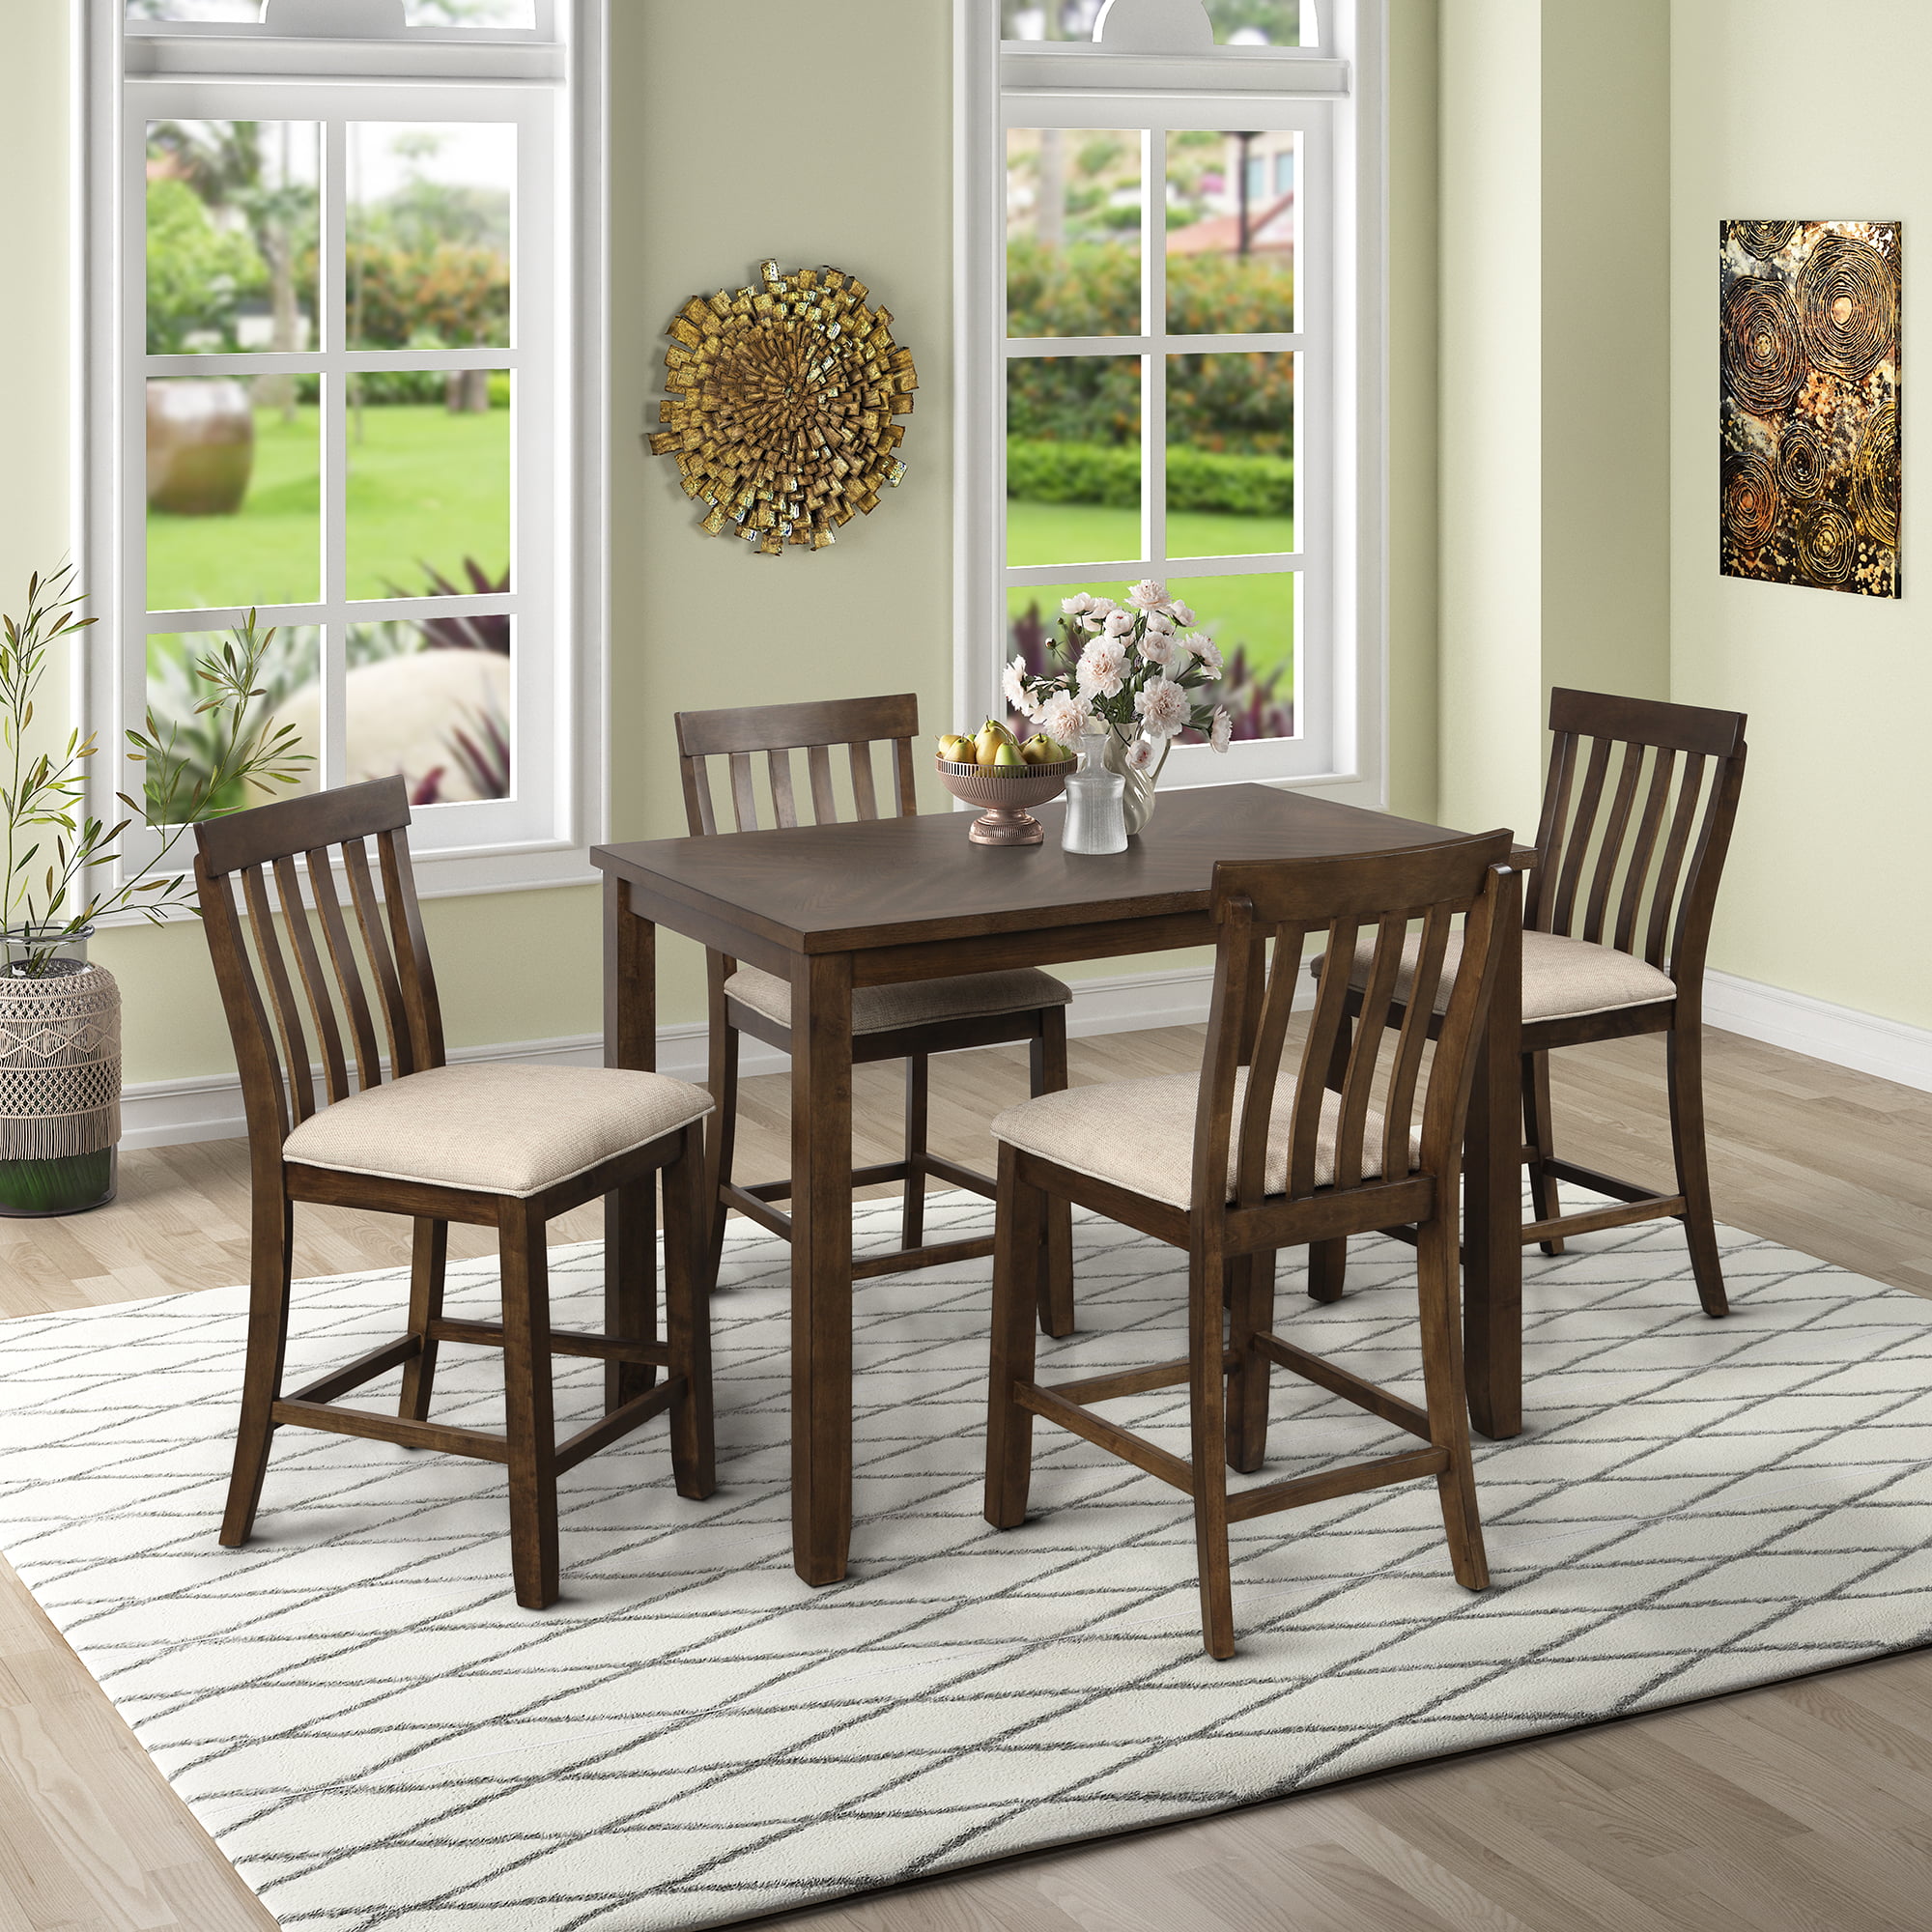 Btmway Wood Kitchen Dining Room Table, High Top Dining Room Sets